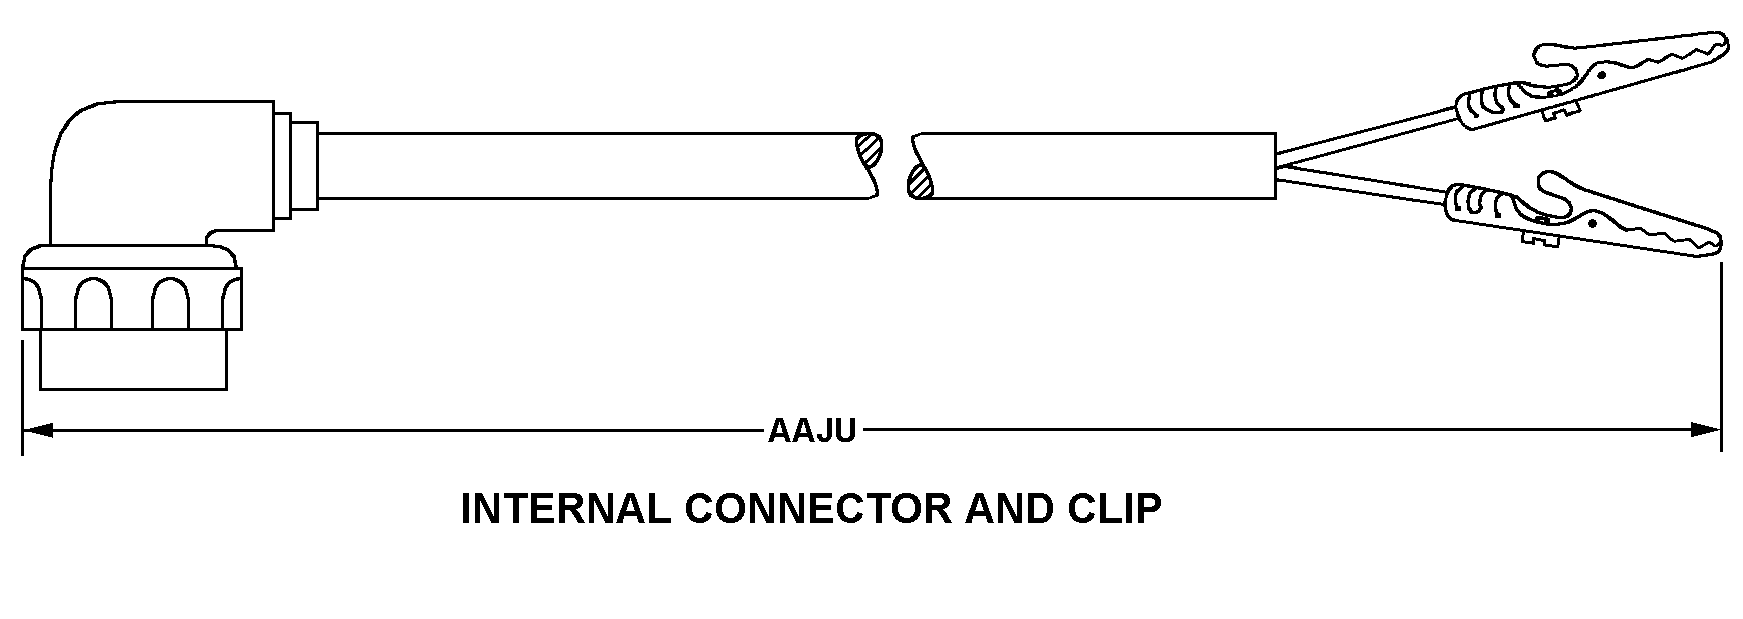 INTERNAL CONNECTOR AND CLIP style nsn 5995-00-553-1526